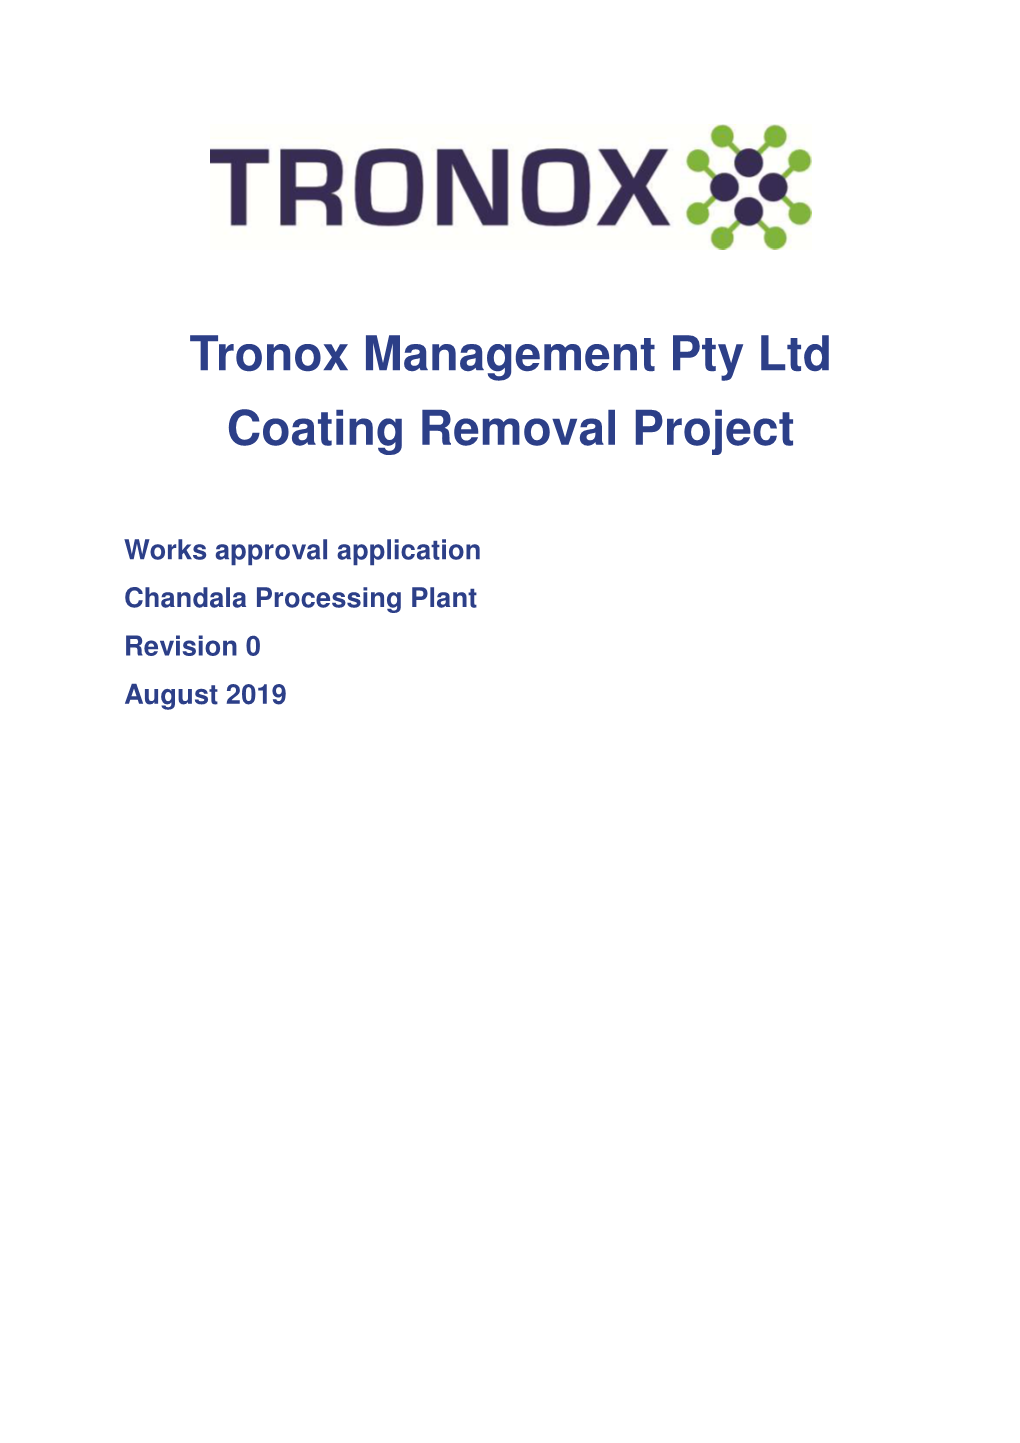 Tronox Management Pty Ltd Coating Removal Project